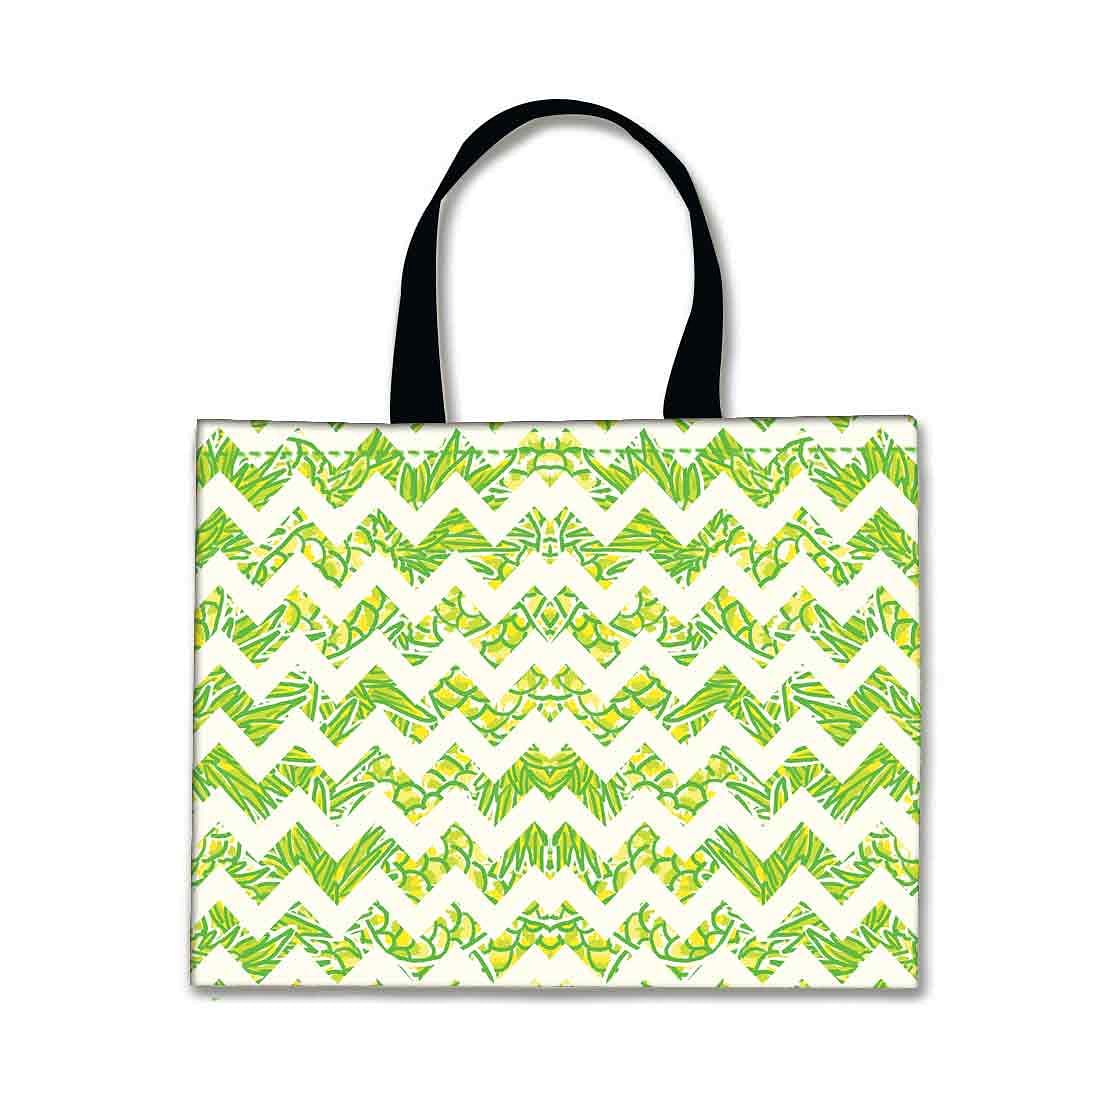 Designer Tote Bag With Zip Beach Gym Travel Bags - Green Lines